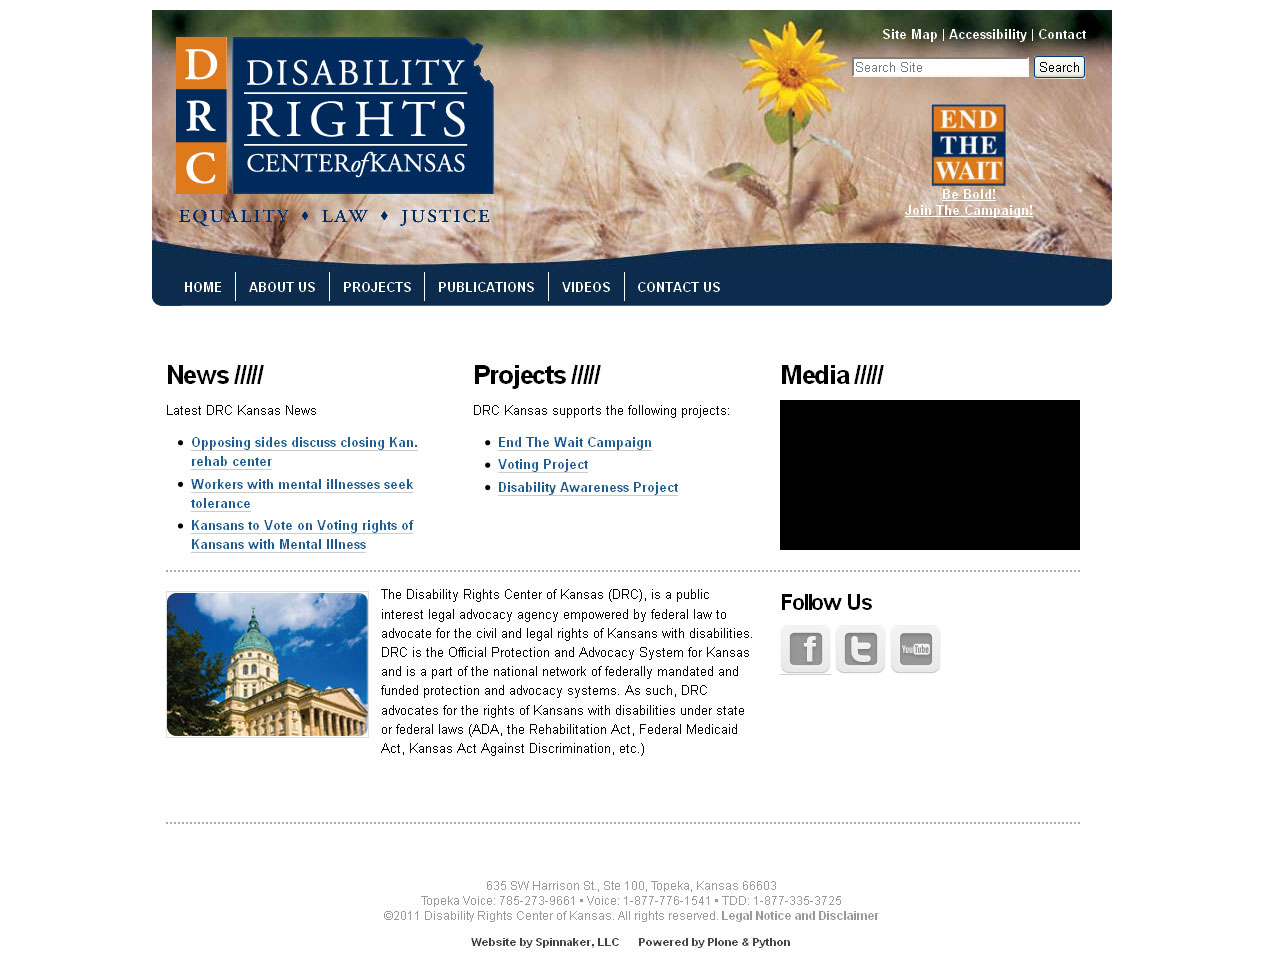 Spinnaker Helps Disability Rights Center of Kansas Launch Two Websites